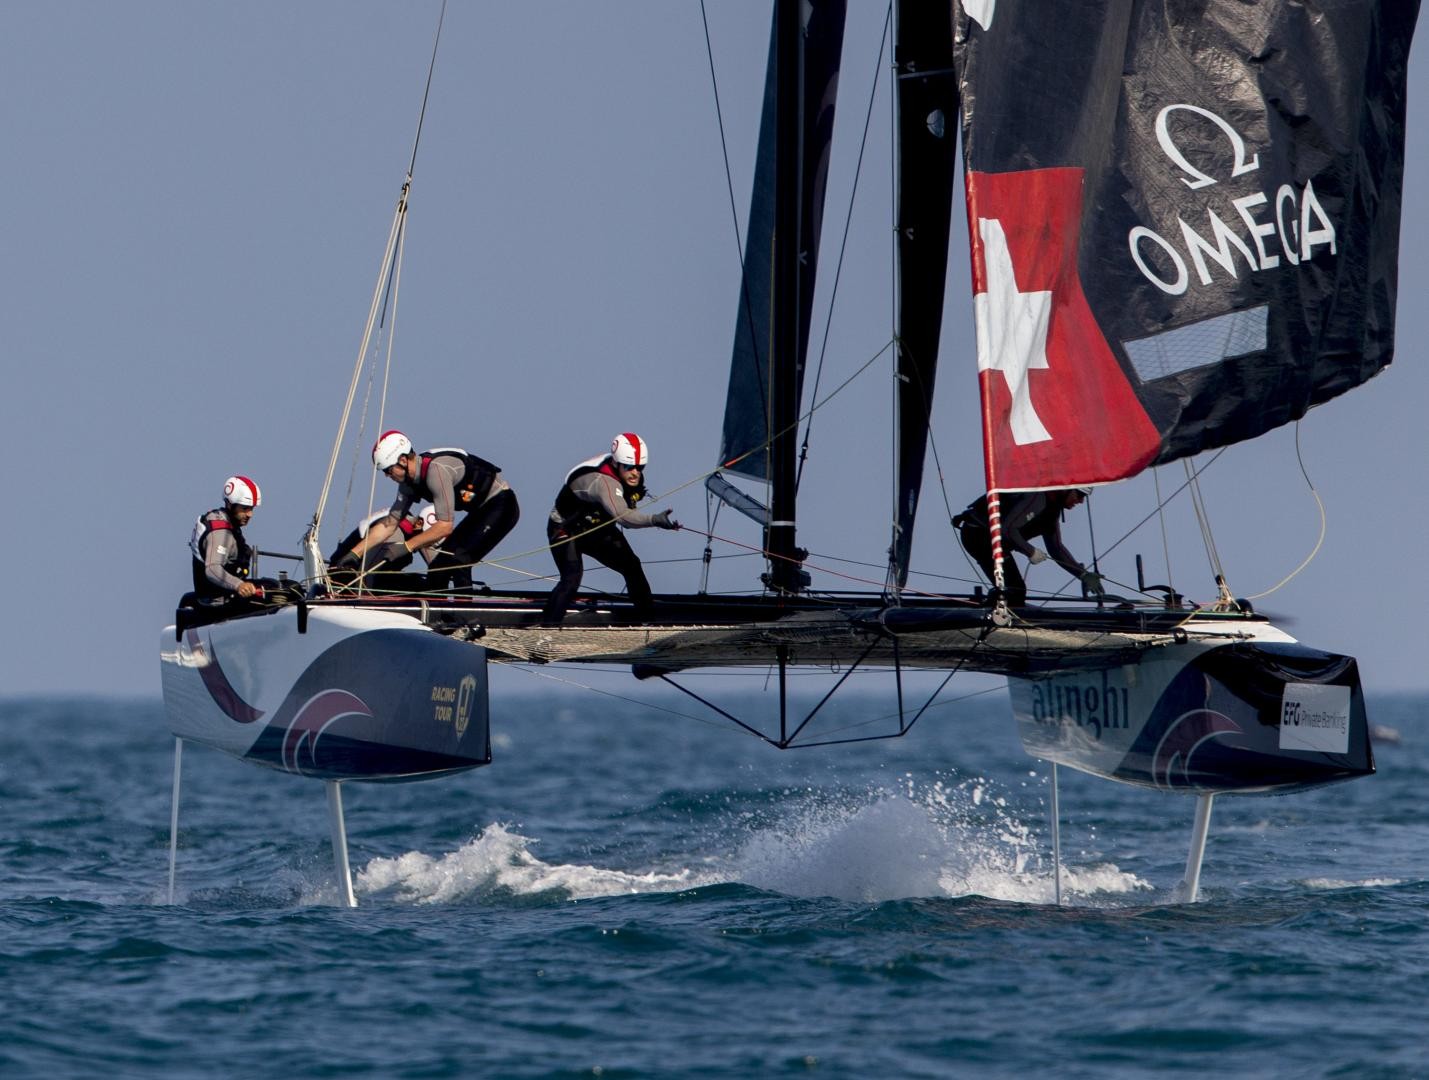 The World Champion Alinghi is hunting for GC32 Racing Tour 2019 glory.